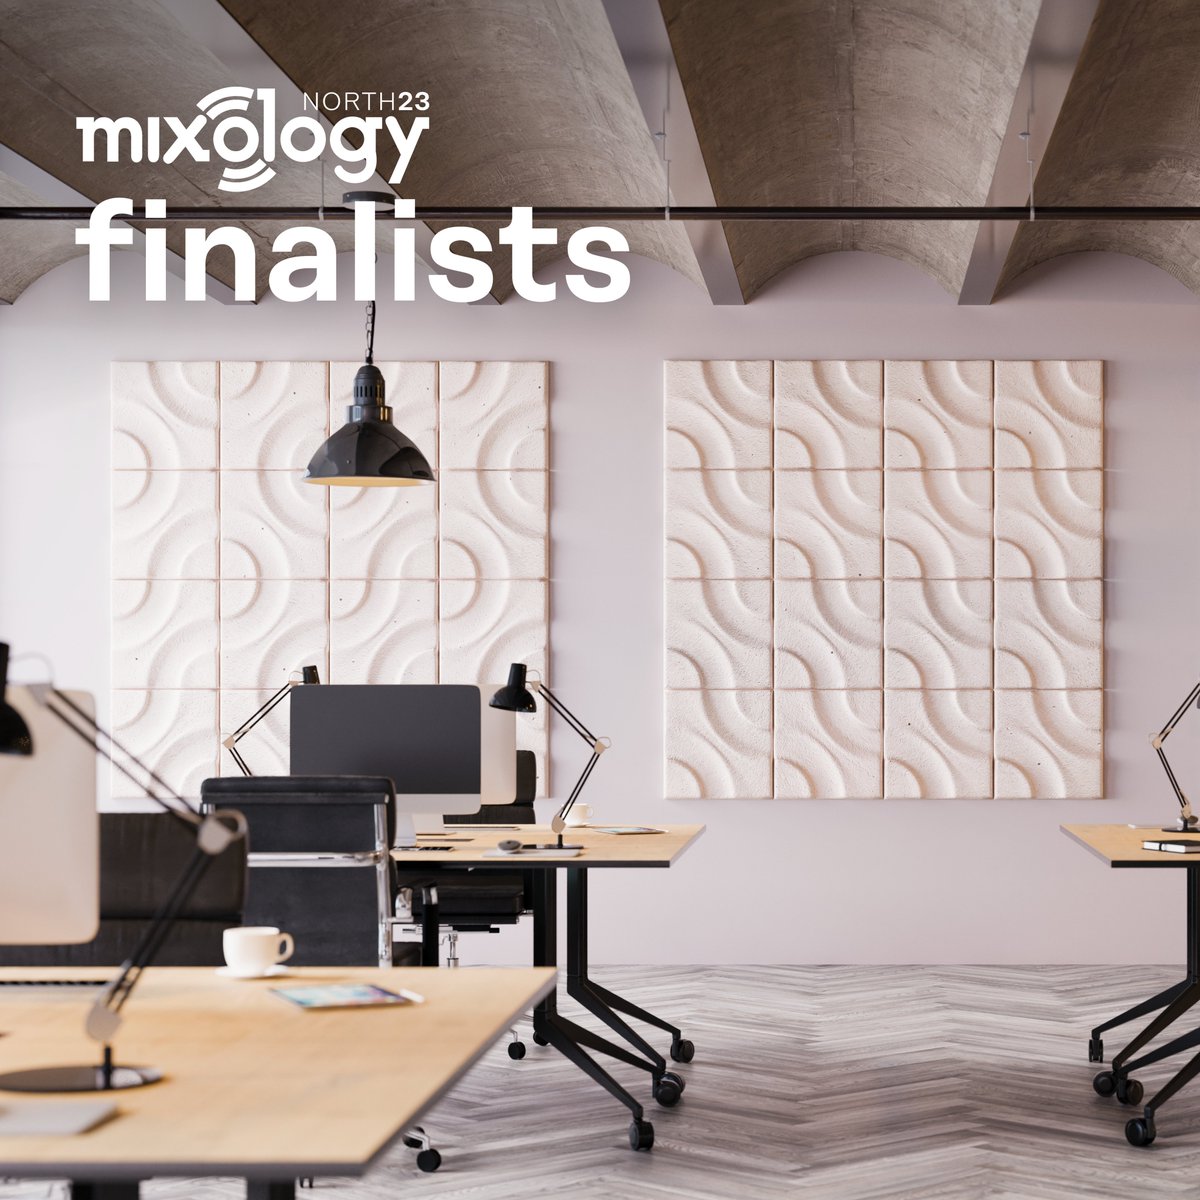 We are beyond thrilled to announce that FIKA, our mycelium acoustic wall tile has been shortlisted for Surface Product of the Year by the judges at @mixinteriors. Thank you for recognising our commitment to operating sustainably #MixologyNorth23 #sustainabledesign #acousticdesign